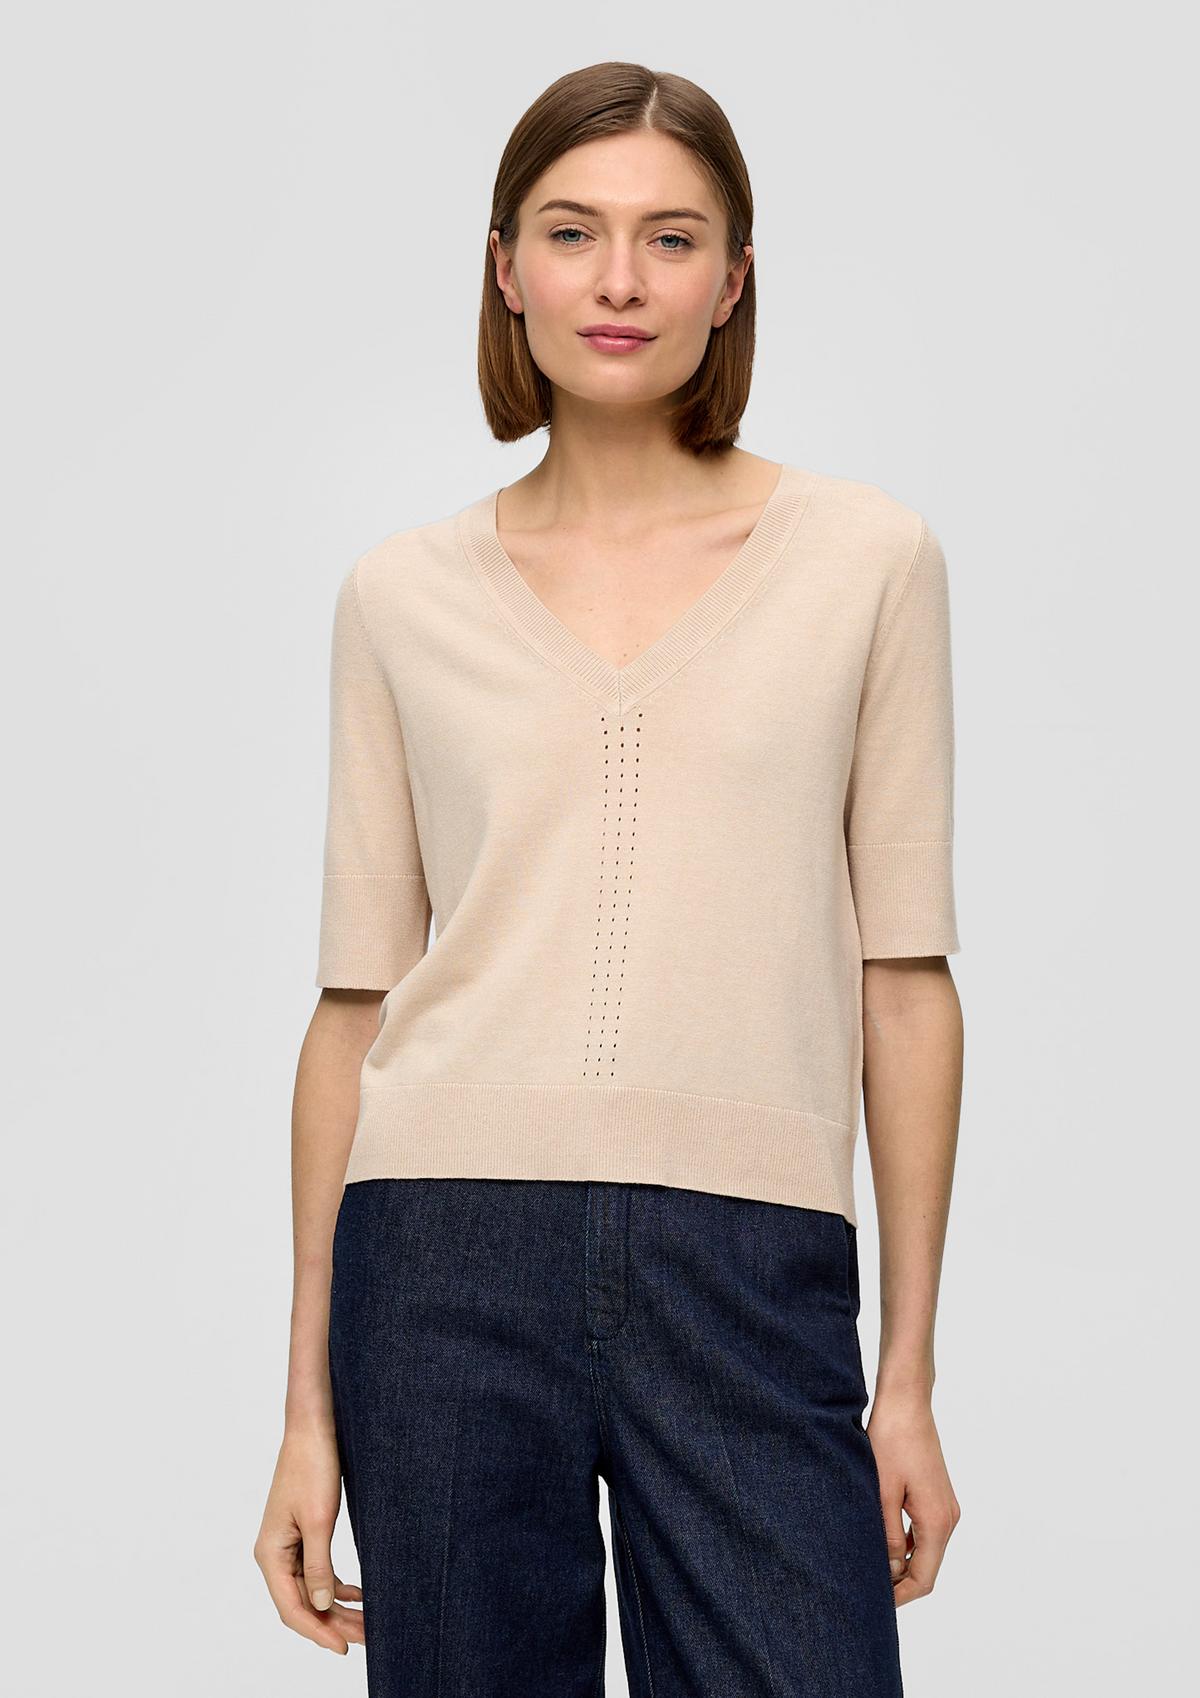 Knitted top with an openwork pattern